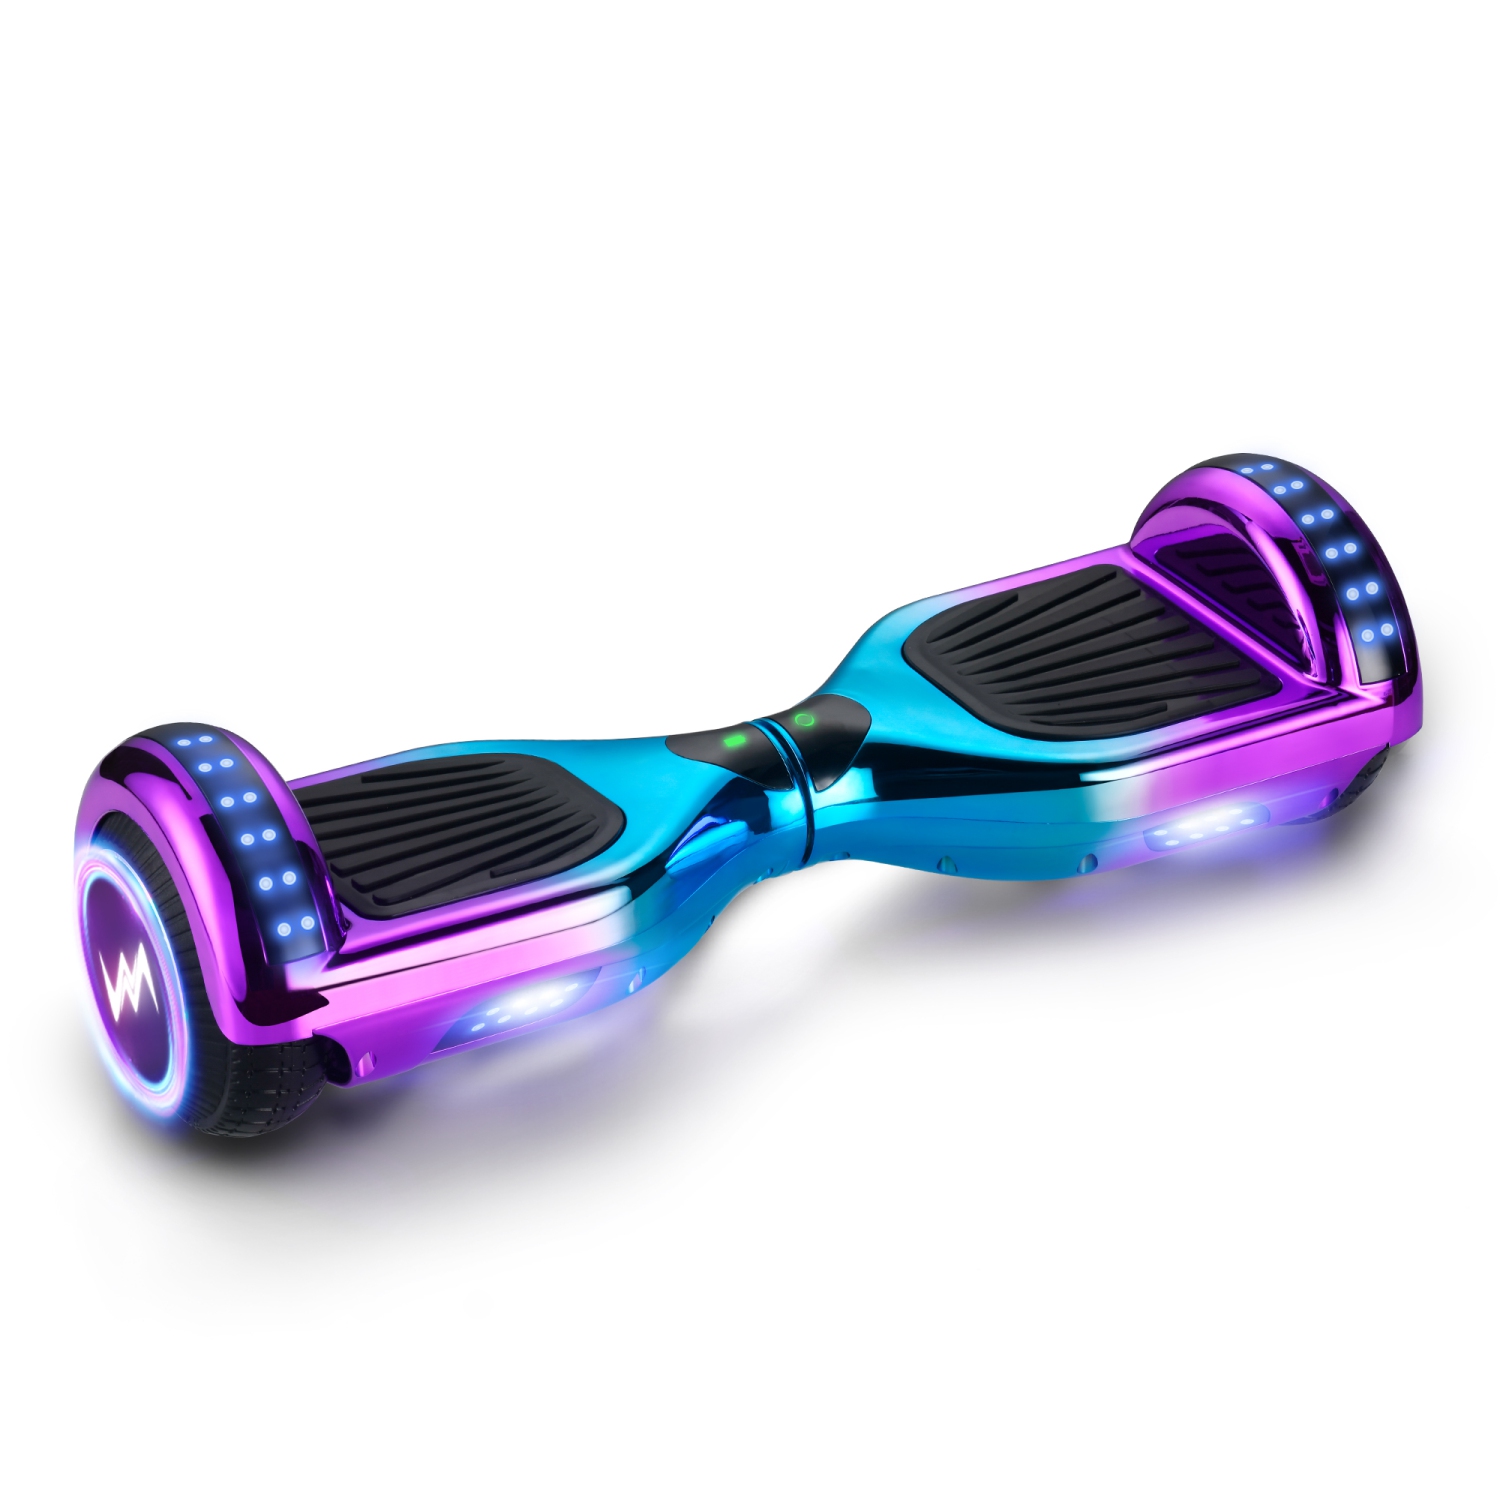 WEELMOTION Chrome Iridescent Hoverboard with Music Speaker and LED Front Lights, Strap Lights, Shining Whees All Terrain 6.5" UL 2272 Certified Hoverboard with free hover board bag